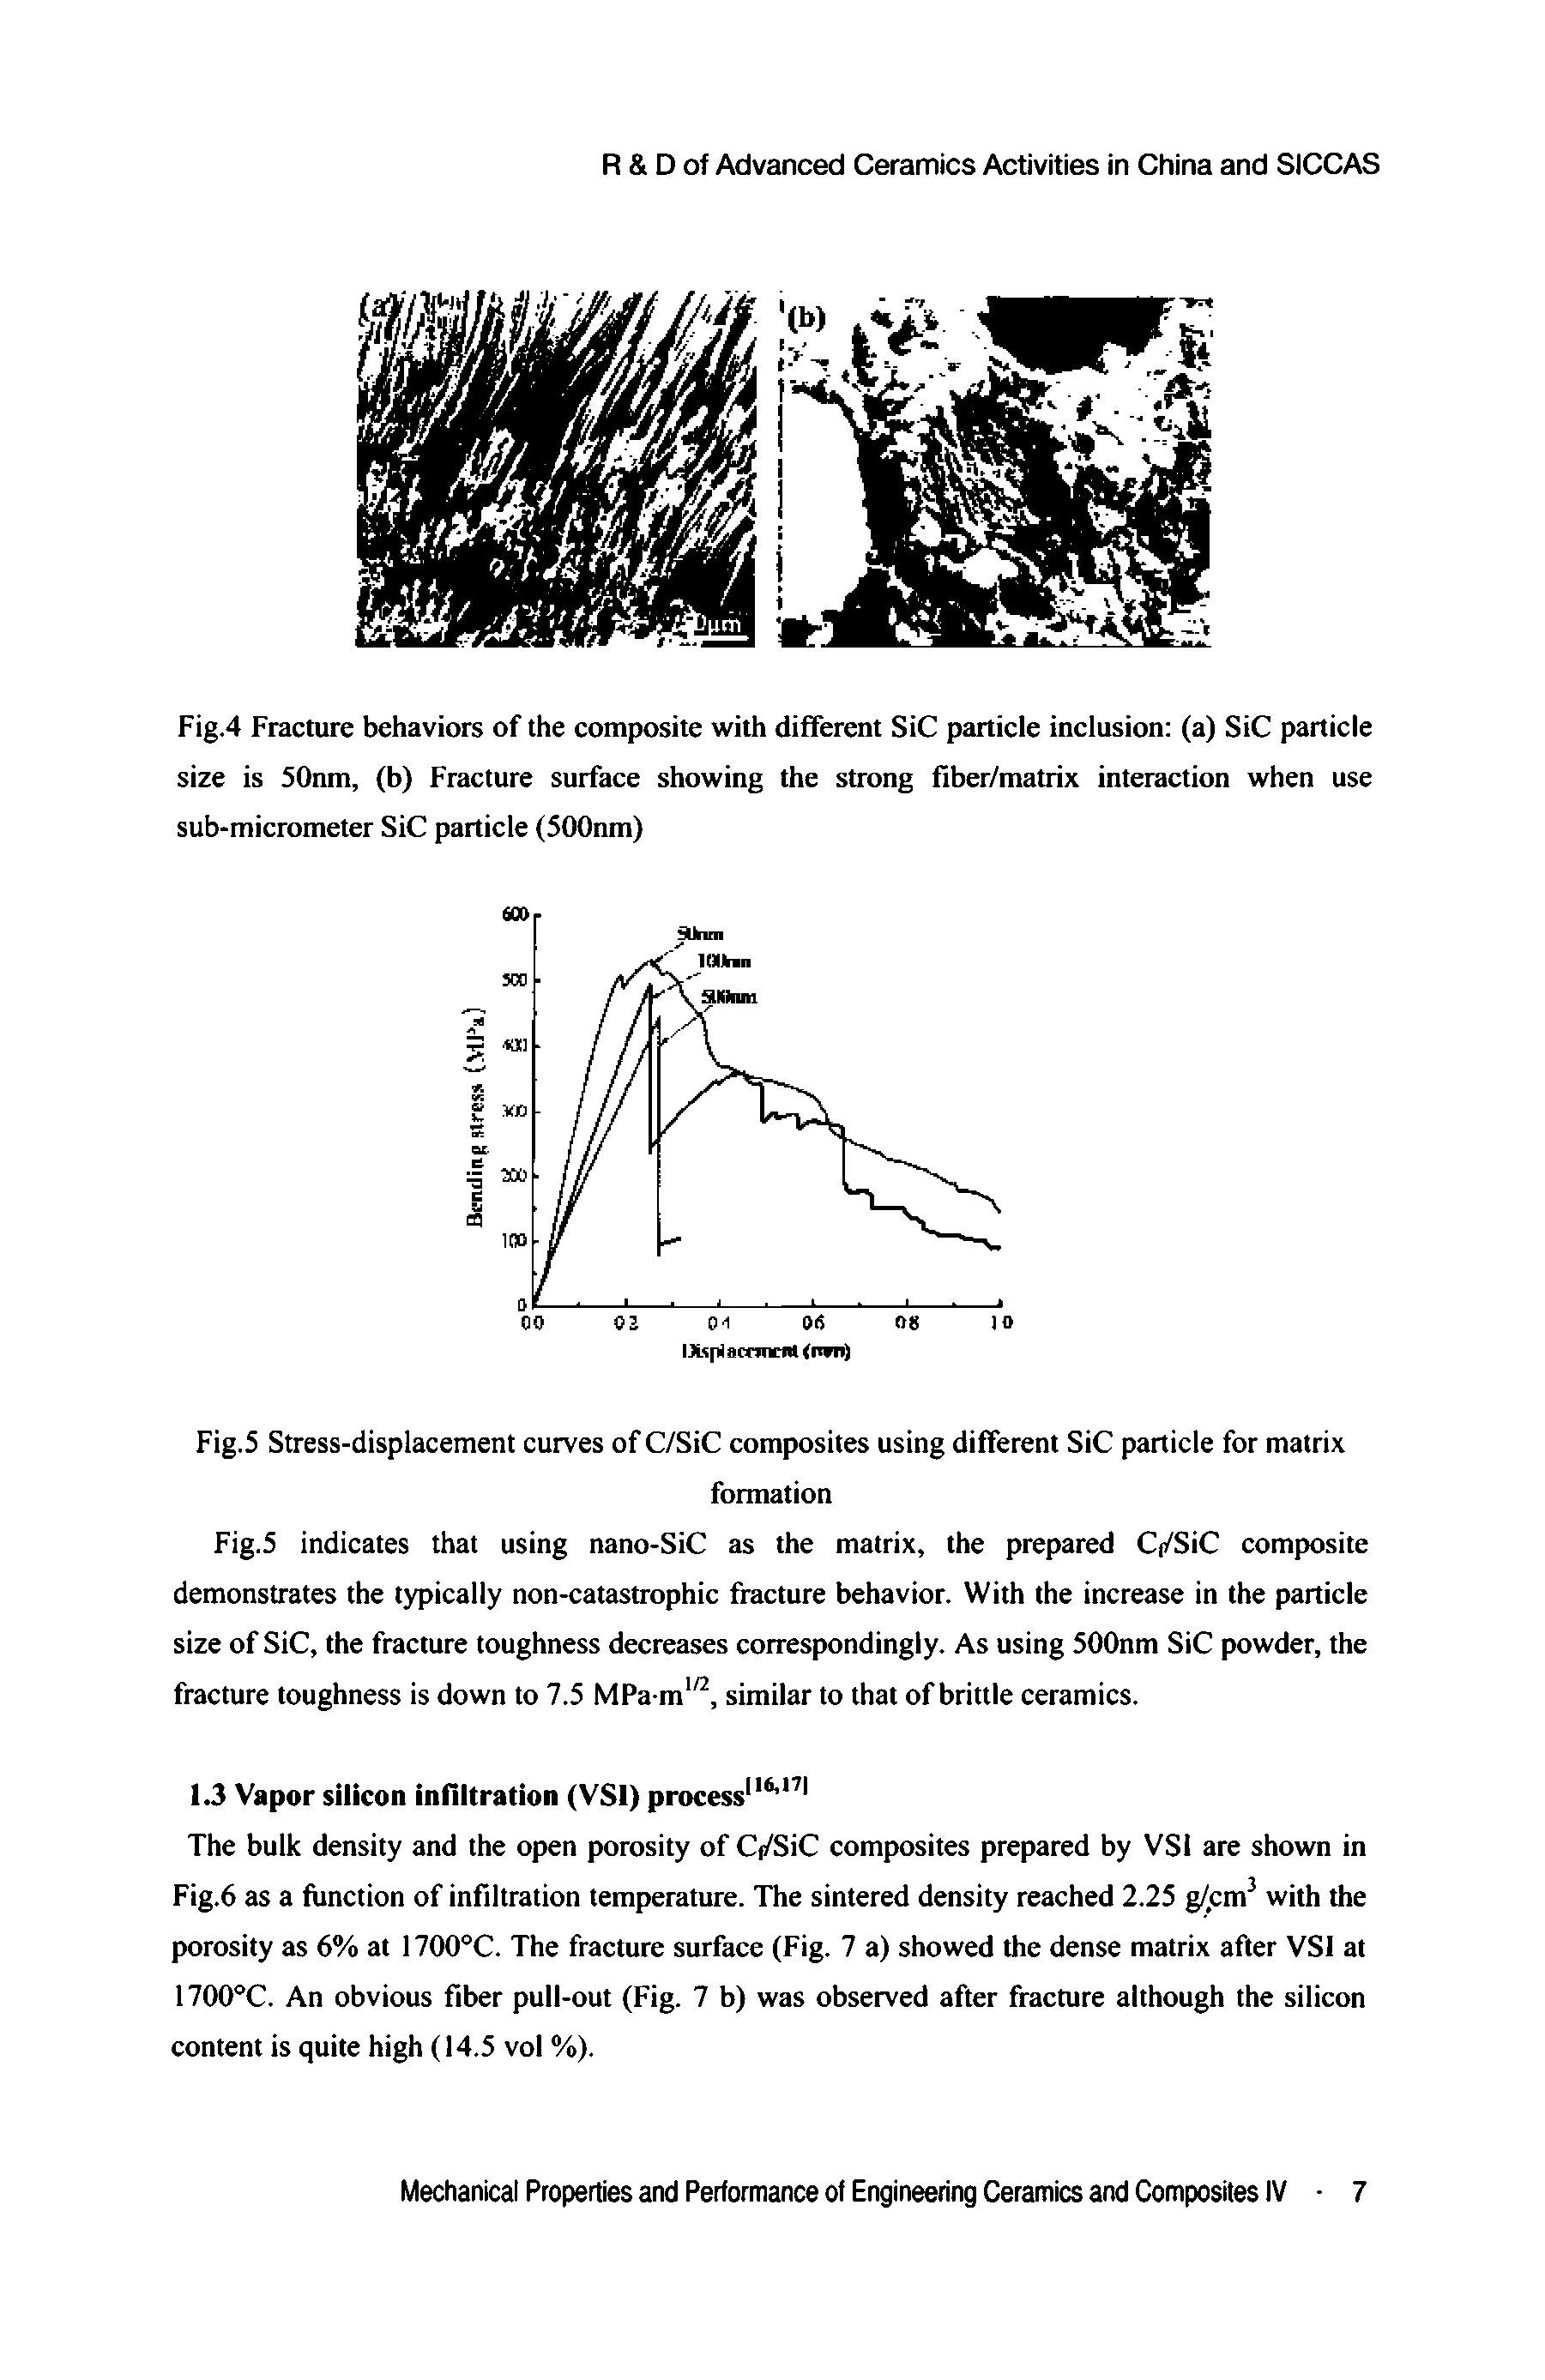 Fig.S indicates that using nano-SiC as the matrix, the prepared C /SiC composite demonstrates the typically non-catastrophic fiacture behavior. With the increase in the particle size of SiC, the fracture toughness decreases correspondingly. As using SOOnm SiC powder, the fracture toughness is down to 7.S MPa-m , similar to that of brittle ceramics.